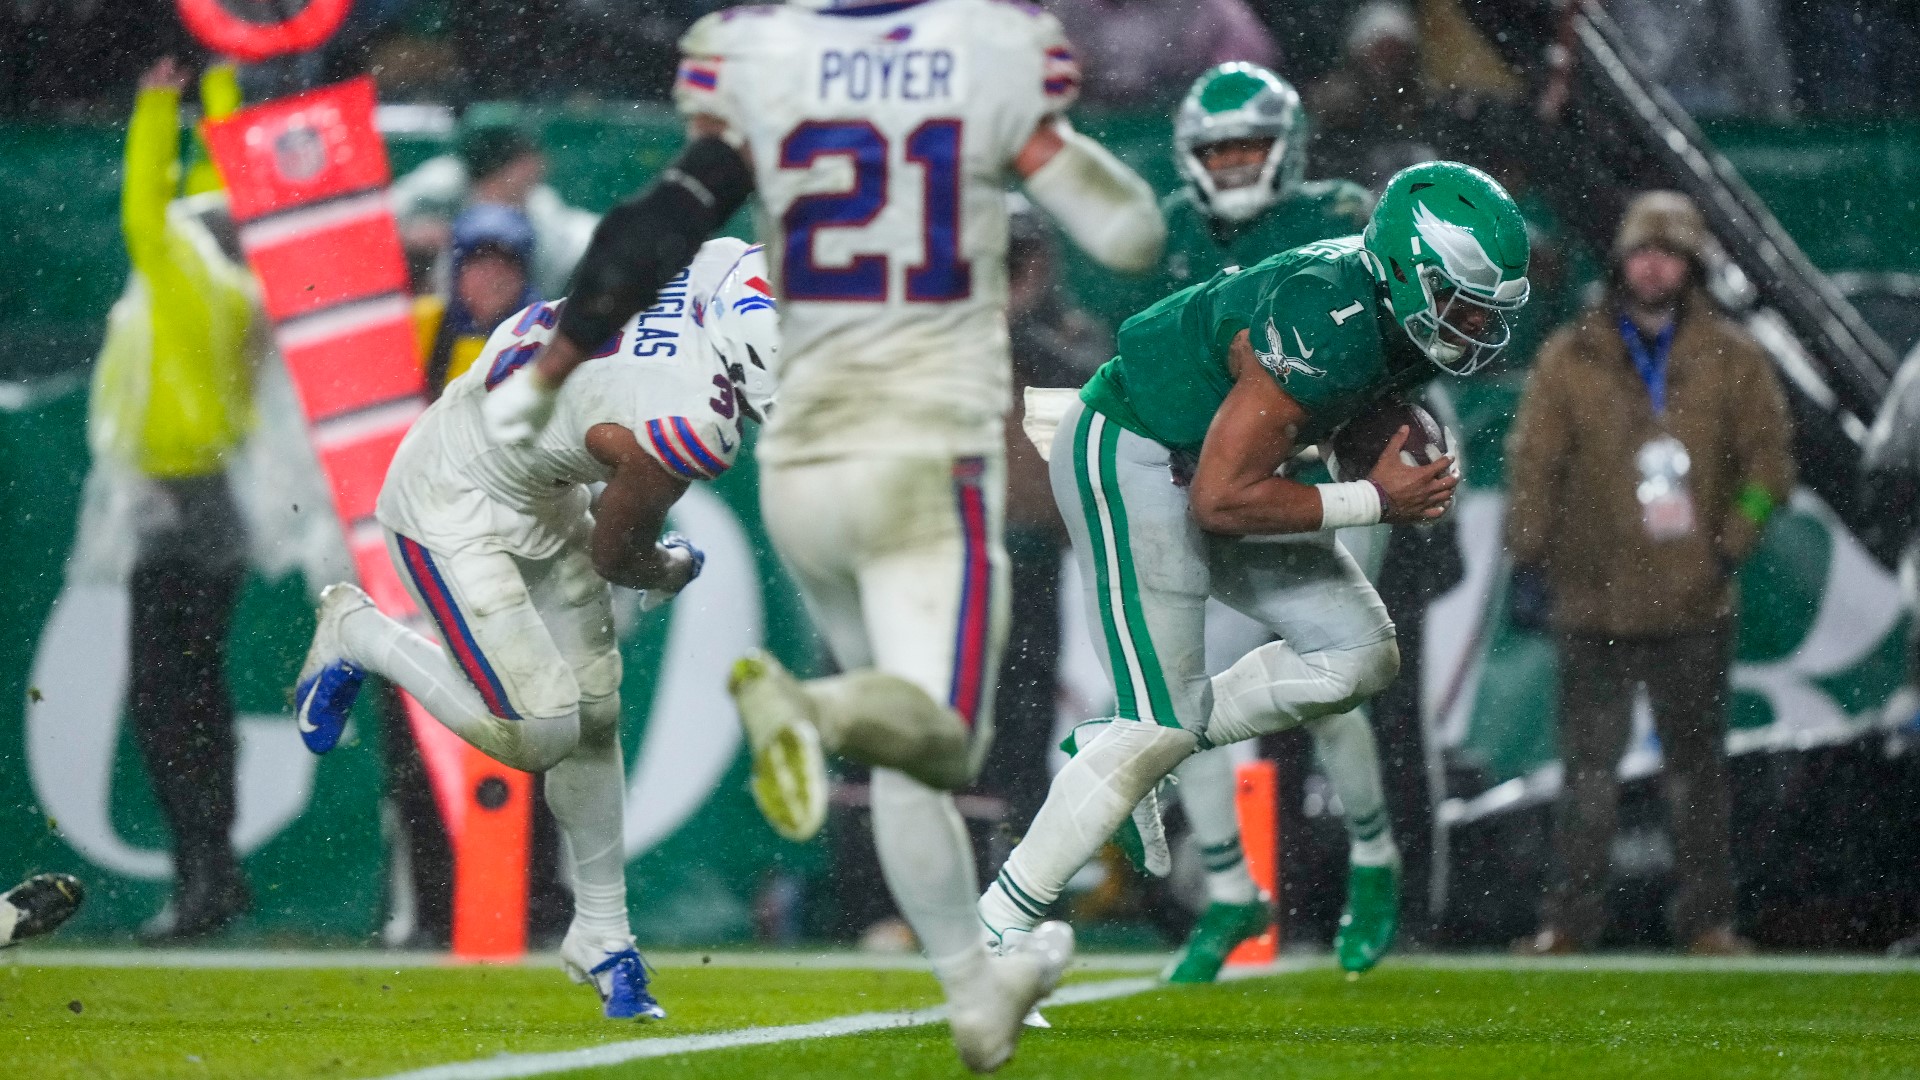 Channel 2 Sports Reporter Jonathan Acosta and WGRZ Bills/NFL Insider Vic Carucci discuss the Bills’ Week 12 overtime loss in Philadelphia against Eagles.